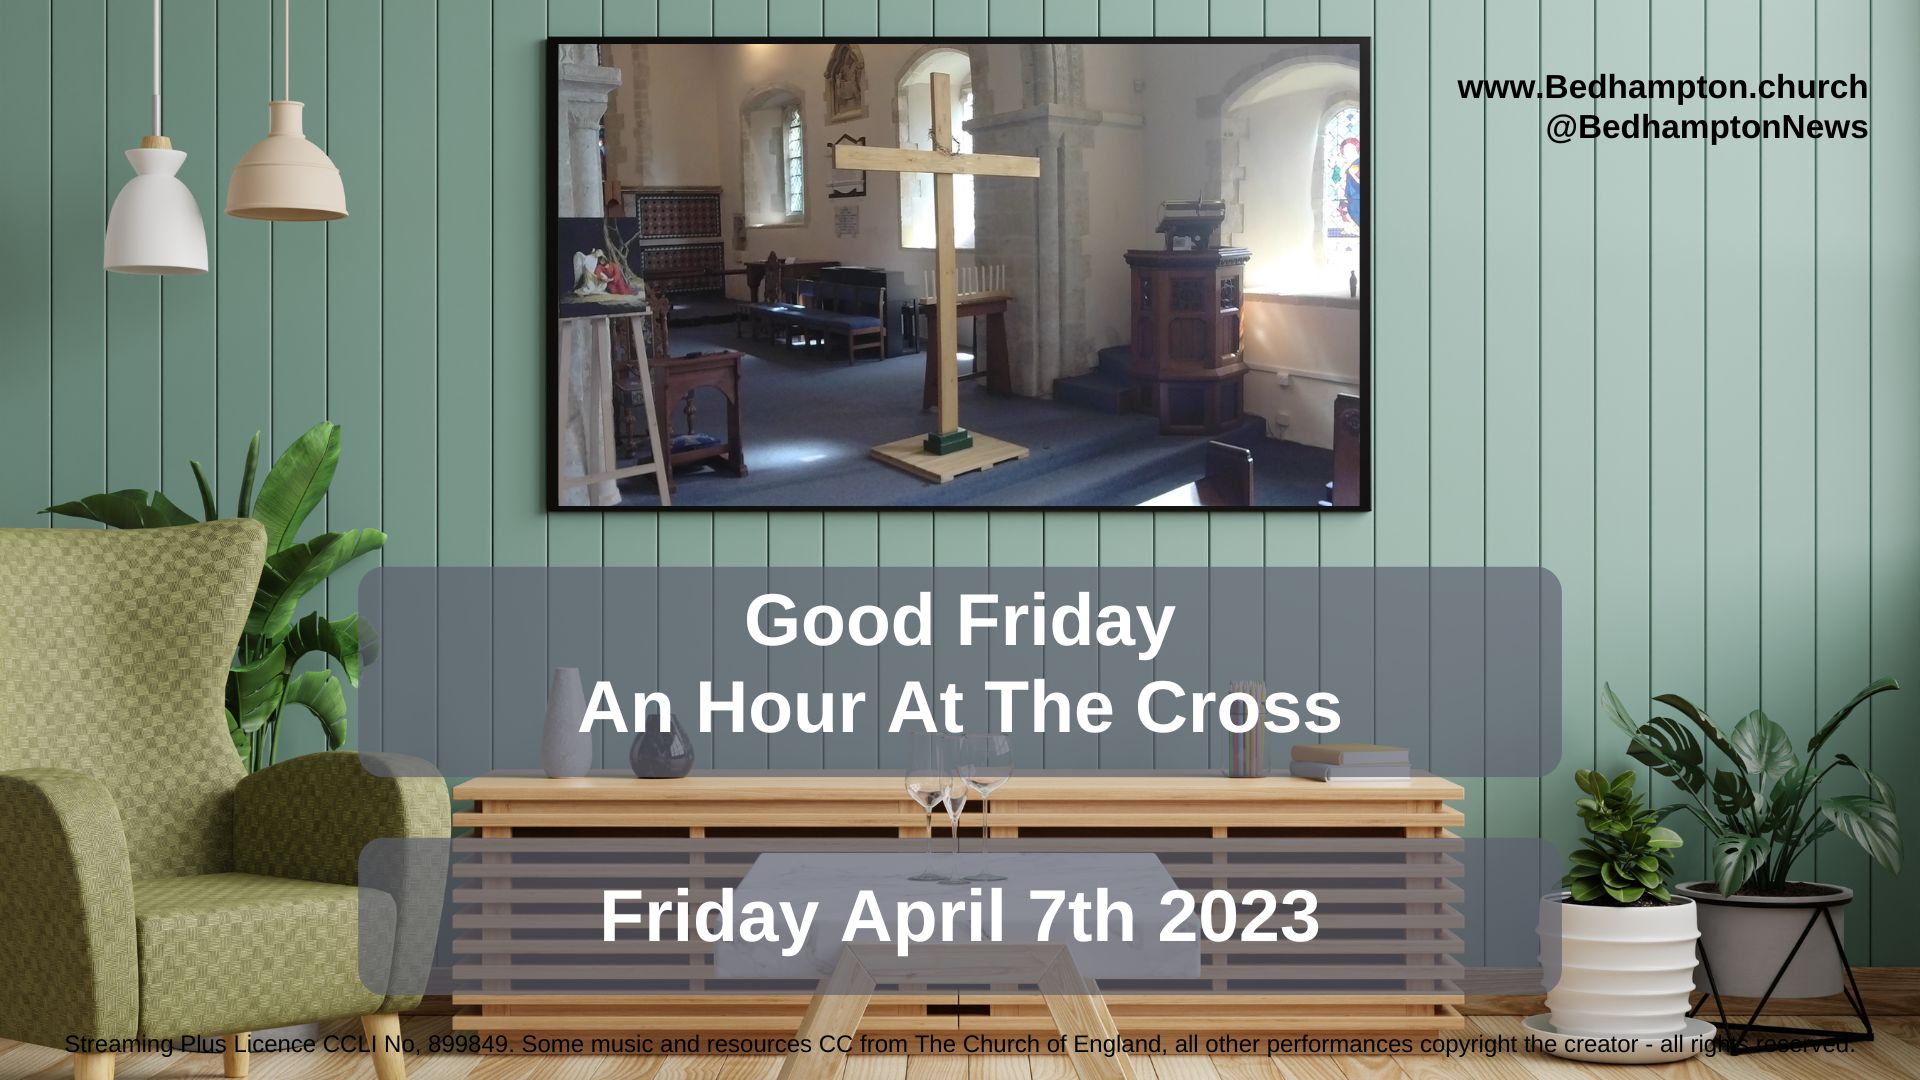 Good Friday – An Hour At The Cross – Friday April 7th 2023